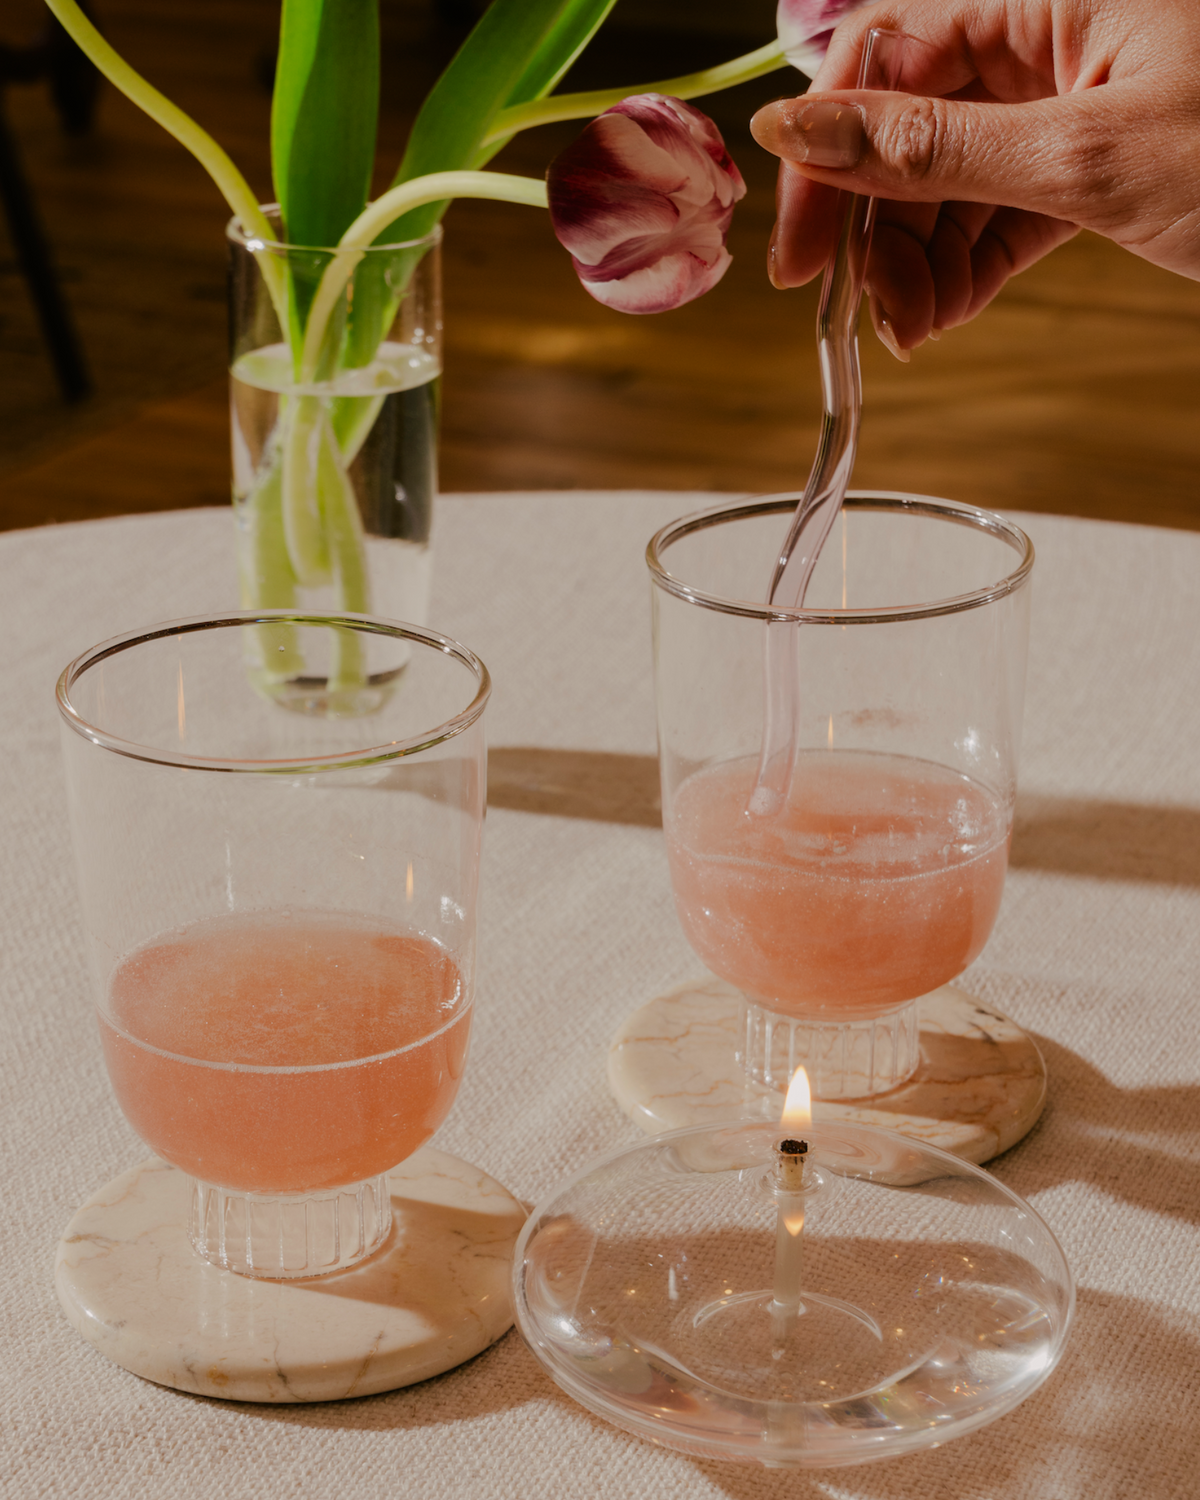 Set of two stemless wine glasses with rose sprinkled with glitter. The stemless wine glass sits on a marble coaster. Made of 100% borosilicate glass it is lightweight yet durable and dishwasher safe. The clear champagne glasses has been used as bud vase with slender tulips. This scene suggests a relaxed yet sophisticated setting, possibly a romantic dinner or a cute dinner with the girlies.